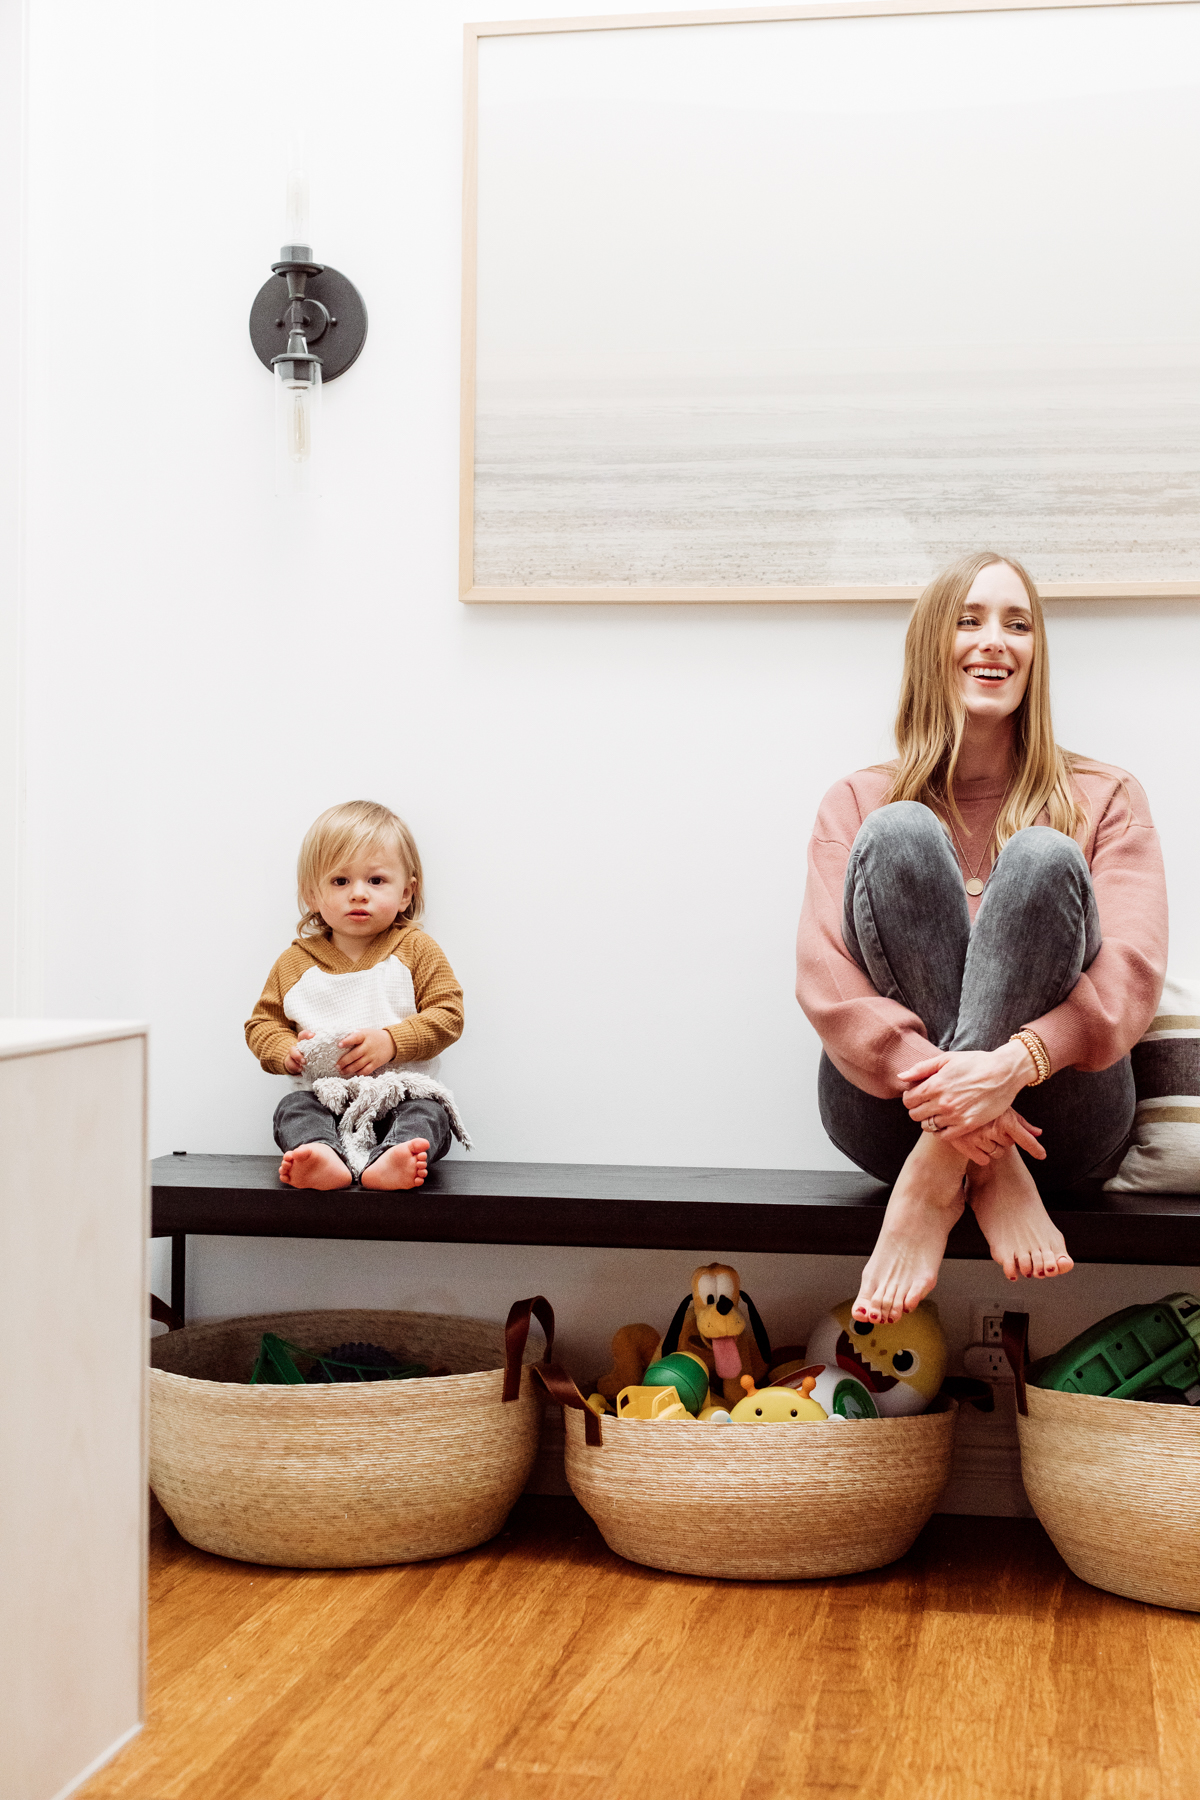 Mother and son sharing their toy organization by Kimberly Lapides of eatsleepwear